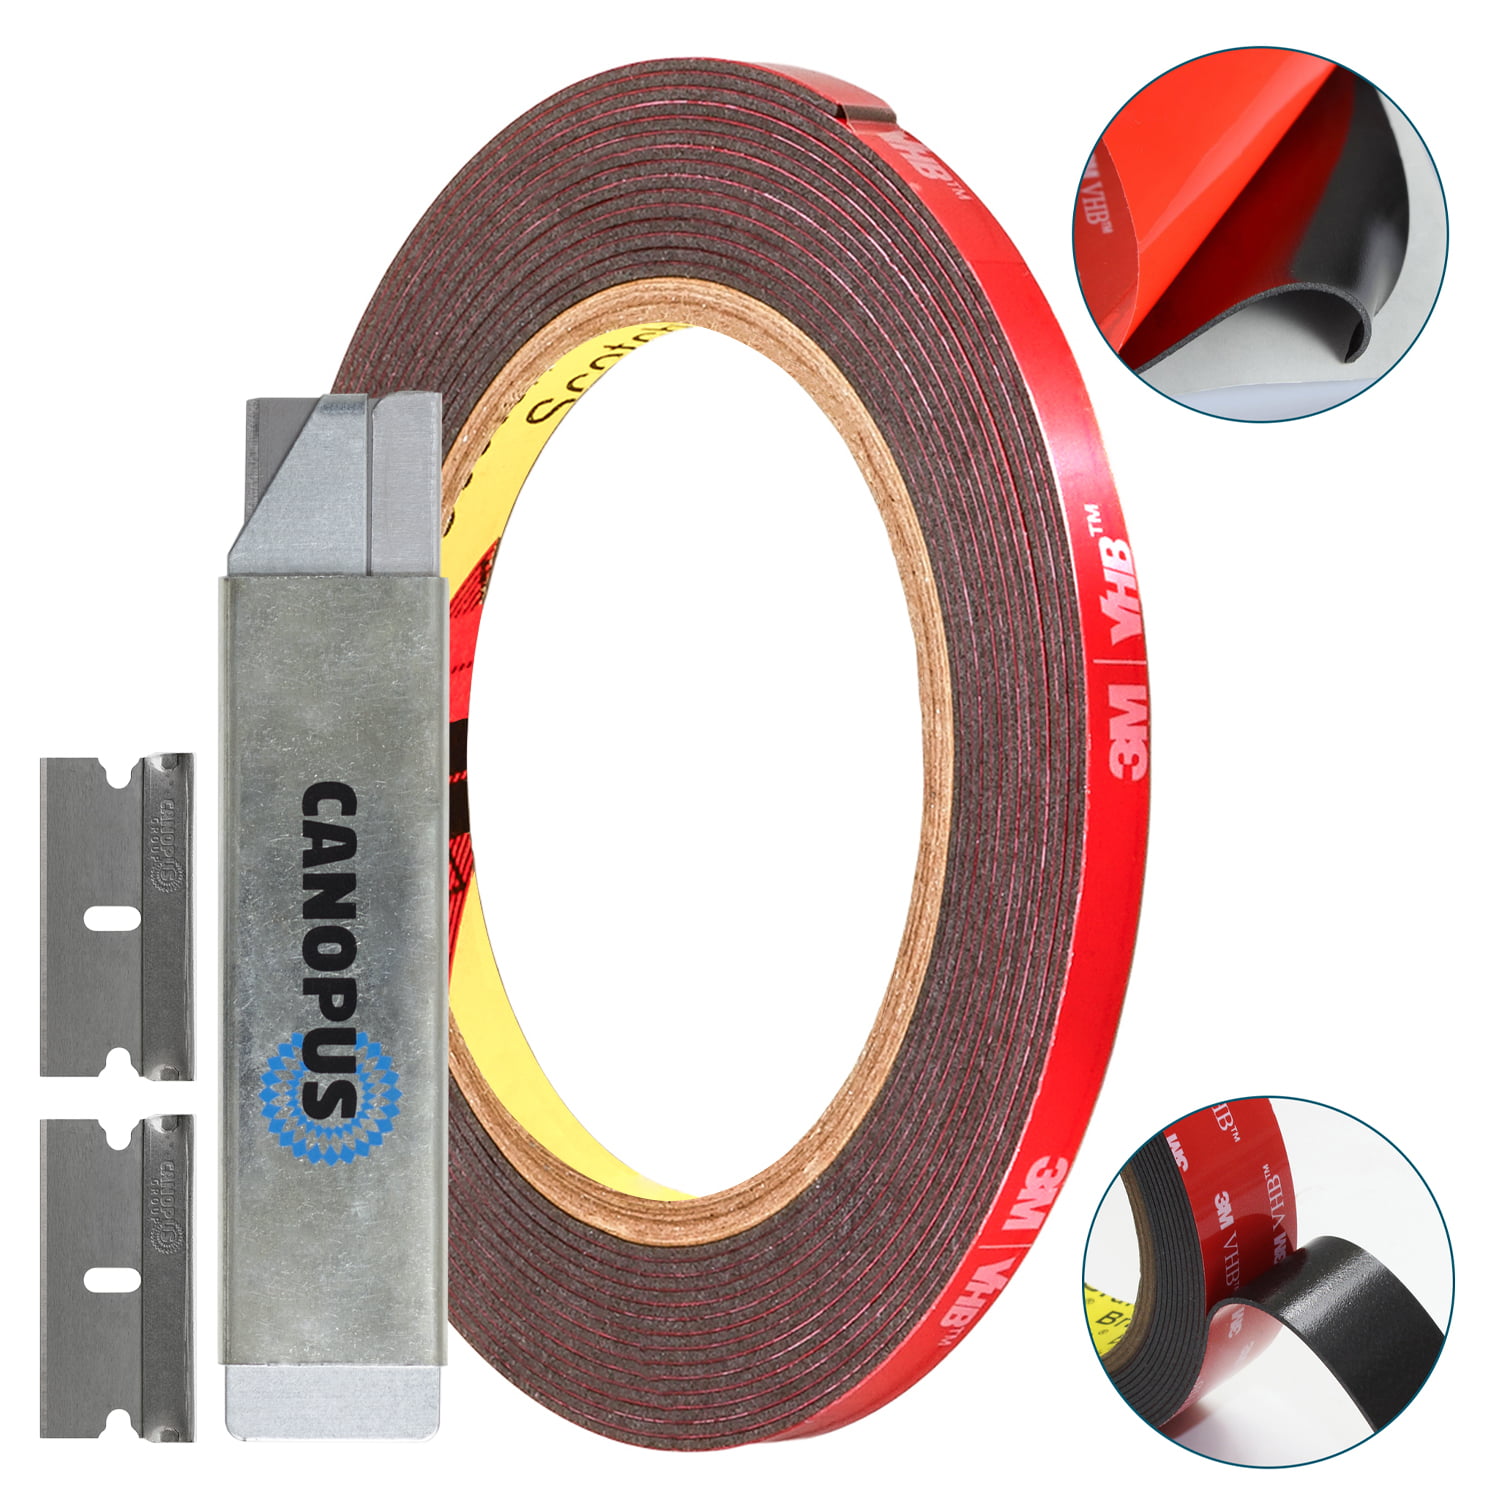 Canopus Double Sided Tape Heavy Duty: Mounting Tape Converted from 3M